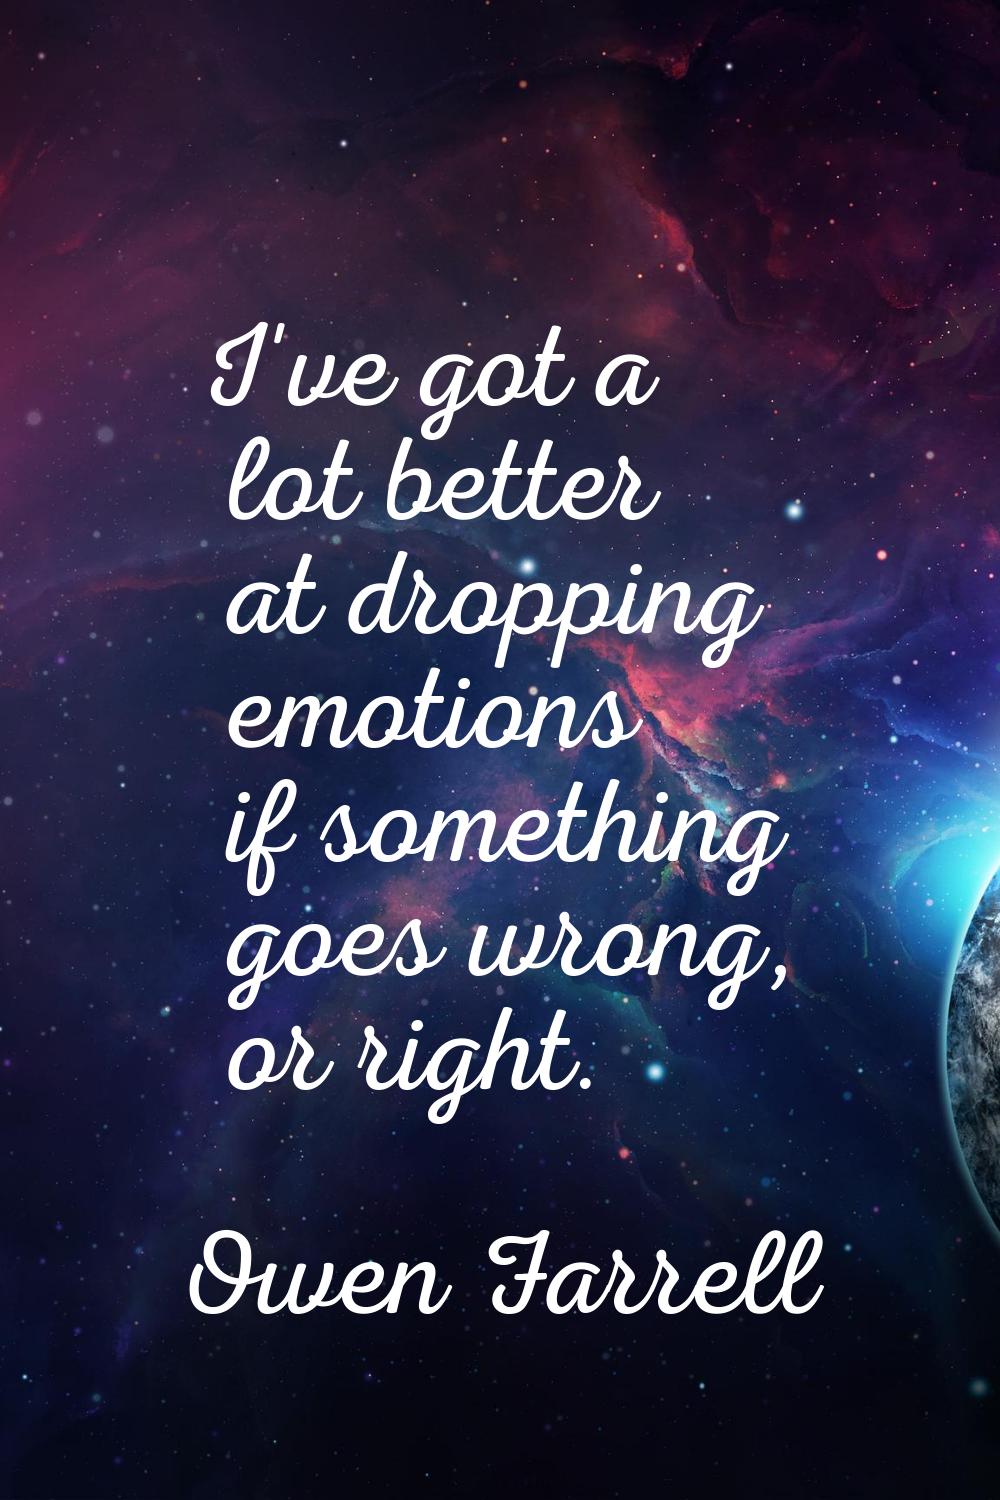 I've got a lot better at dropping emotions if something goes wrong, or right.